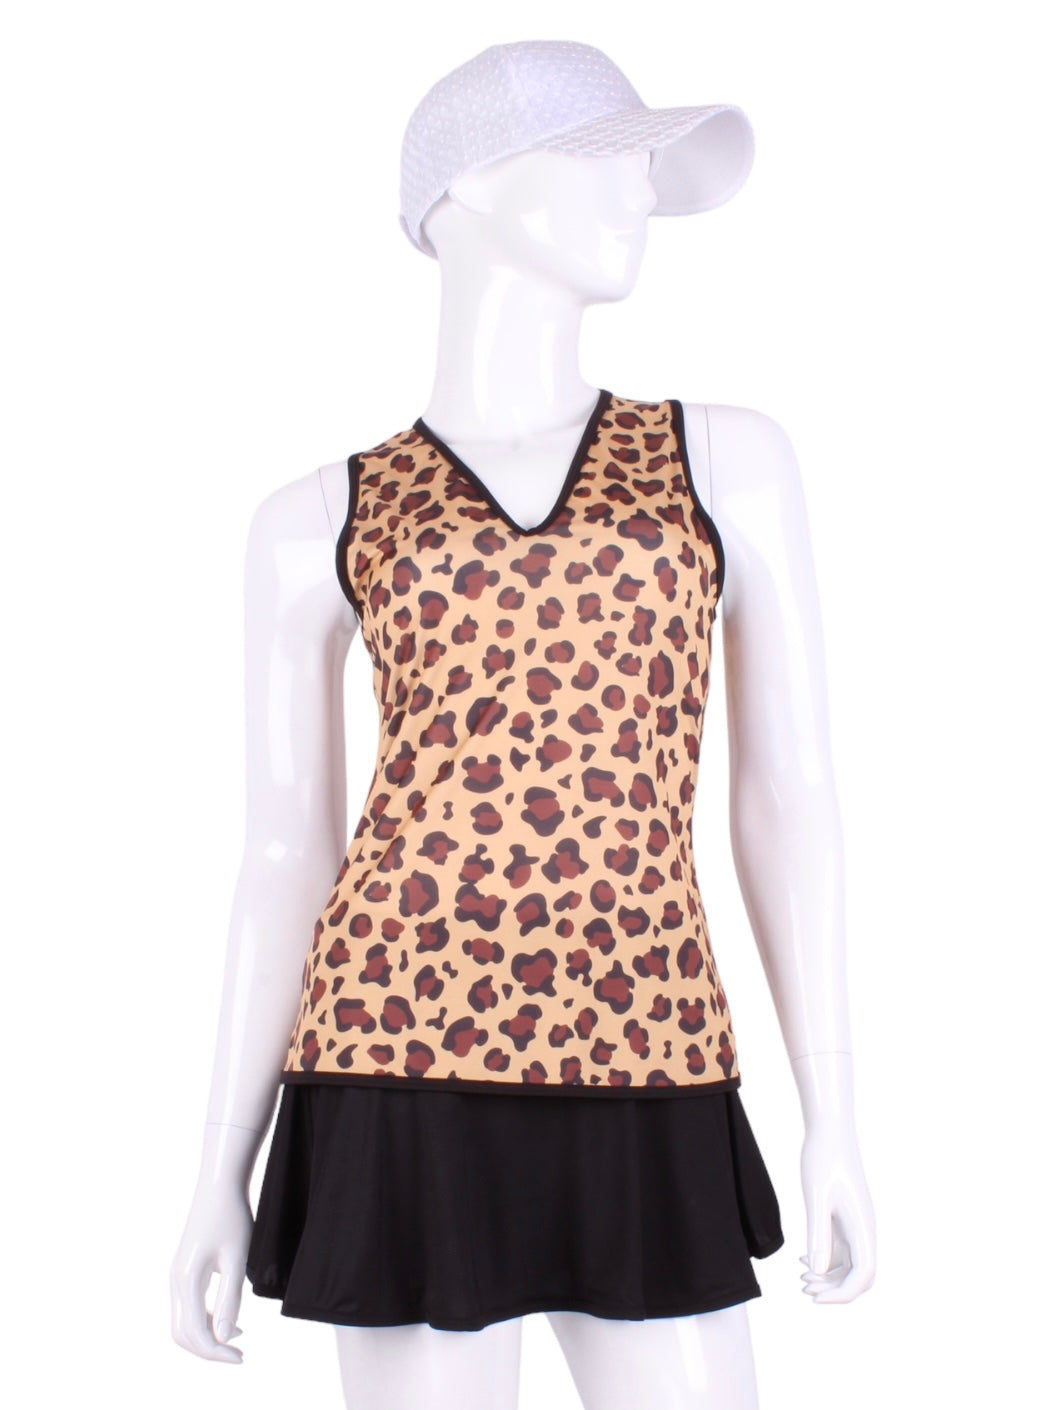 Leopard Vee Tank. A fun tennis tank top - with Leopard Bring - and quick-drying breathable fabric.  Vee front and tee back with two-needle cover stitches at each seam.   Smooth black binding and black stitching finishes the edges with a touch of sass.  